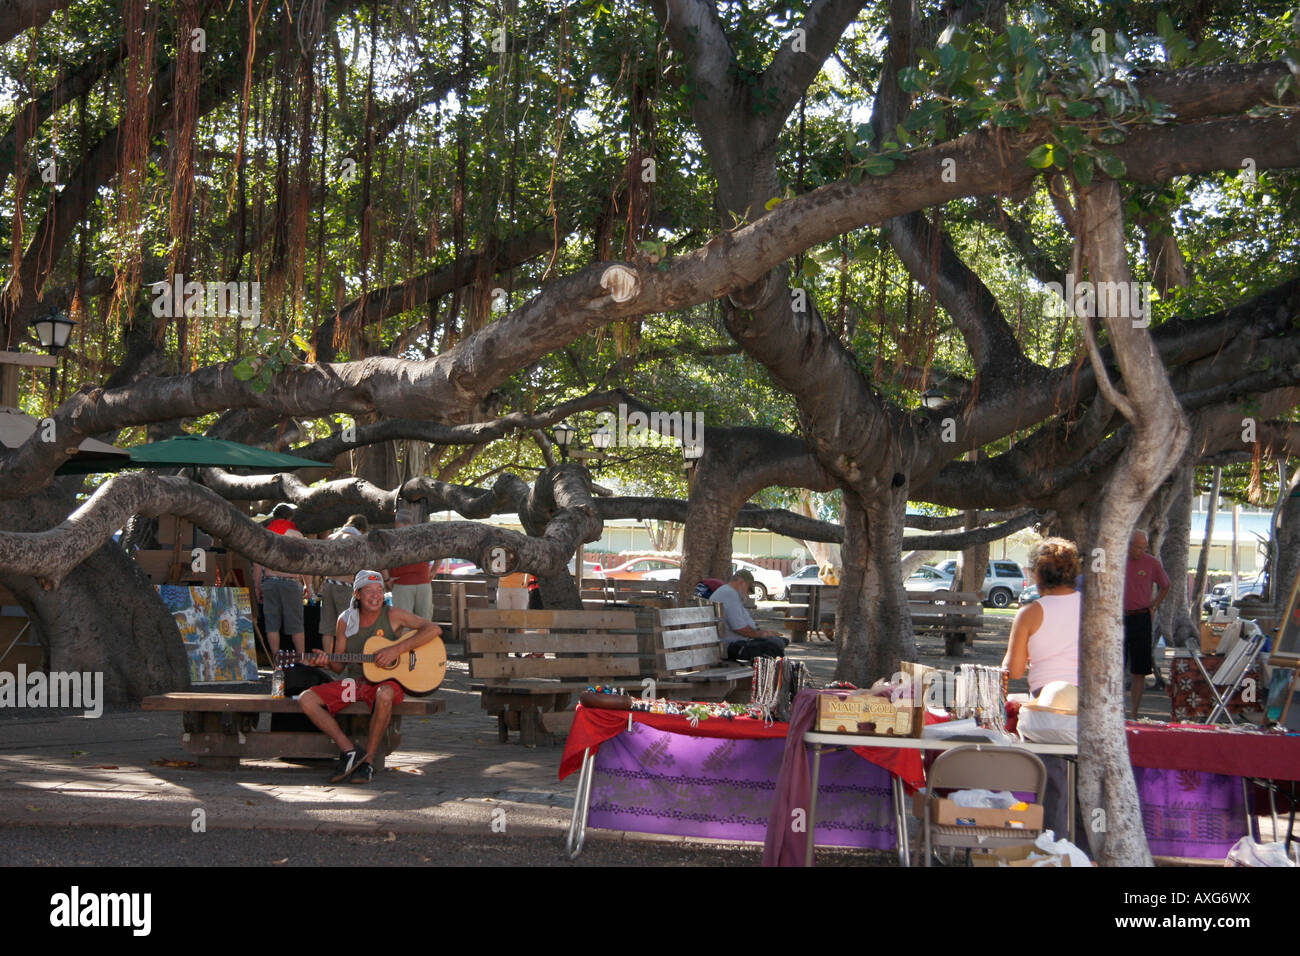 LOCAL ART MARKET UNDER THE LARGEST BANYAN TREES IN THE WORLD WHICH IS IN MAUI, HAWAII. IT IS THE SIZE OF A CITY BLOCK Stock Photo